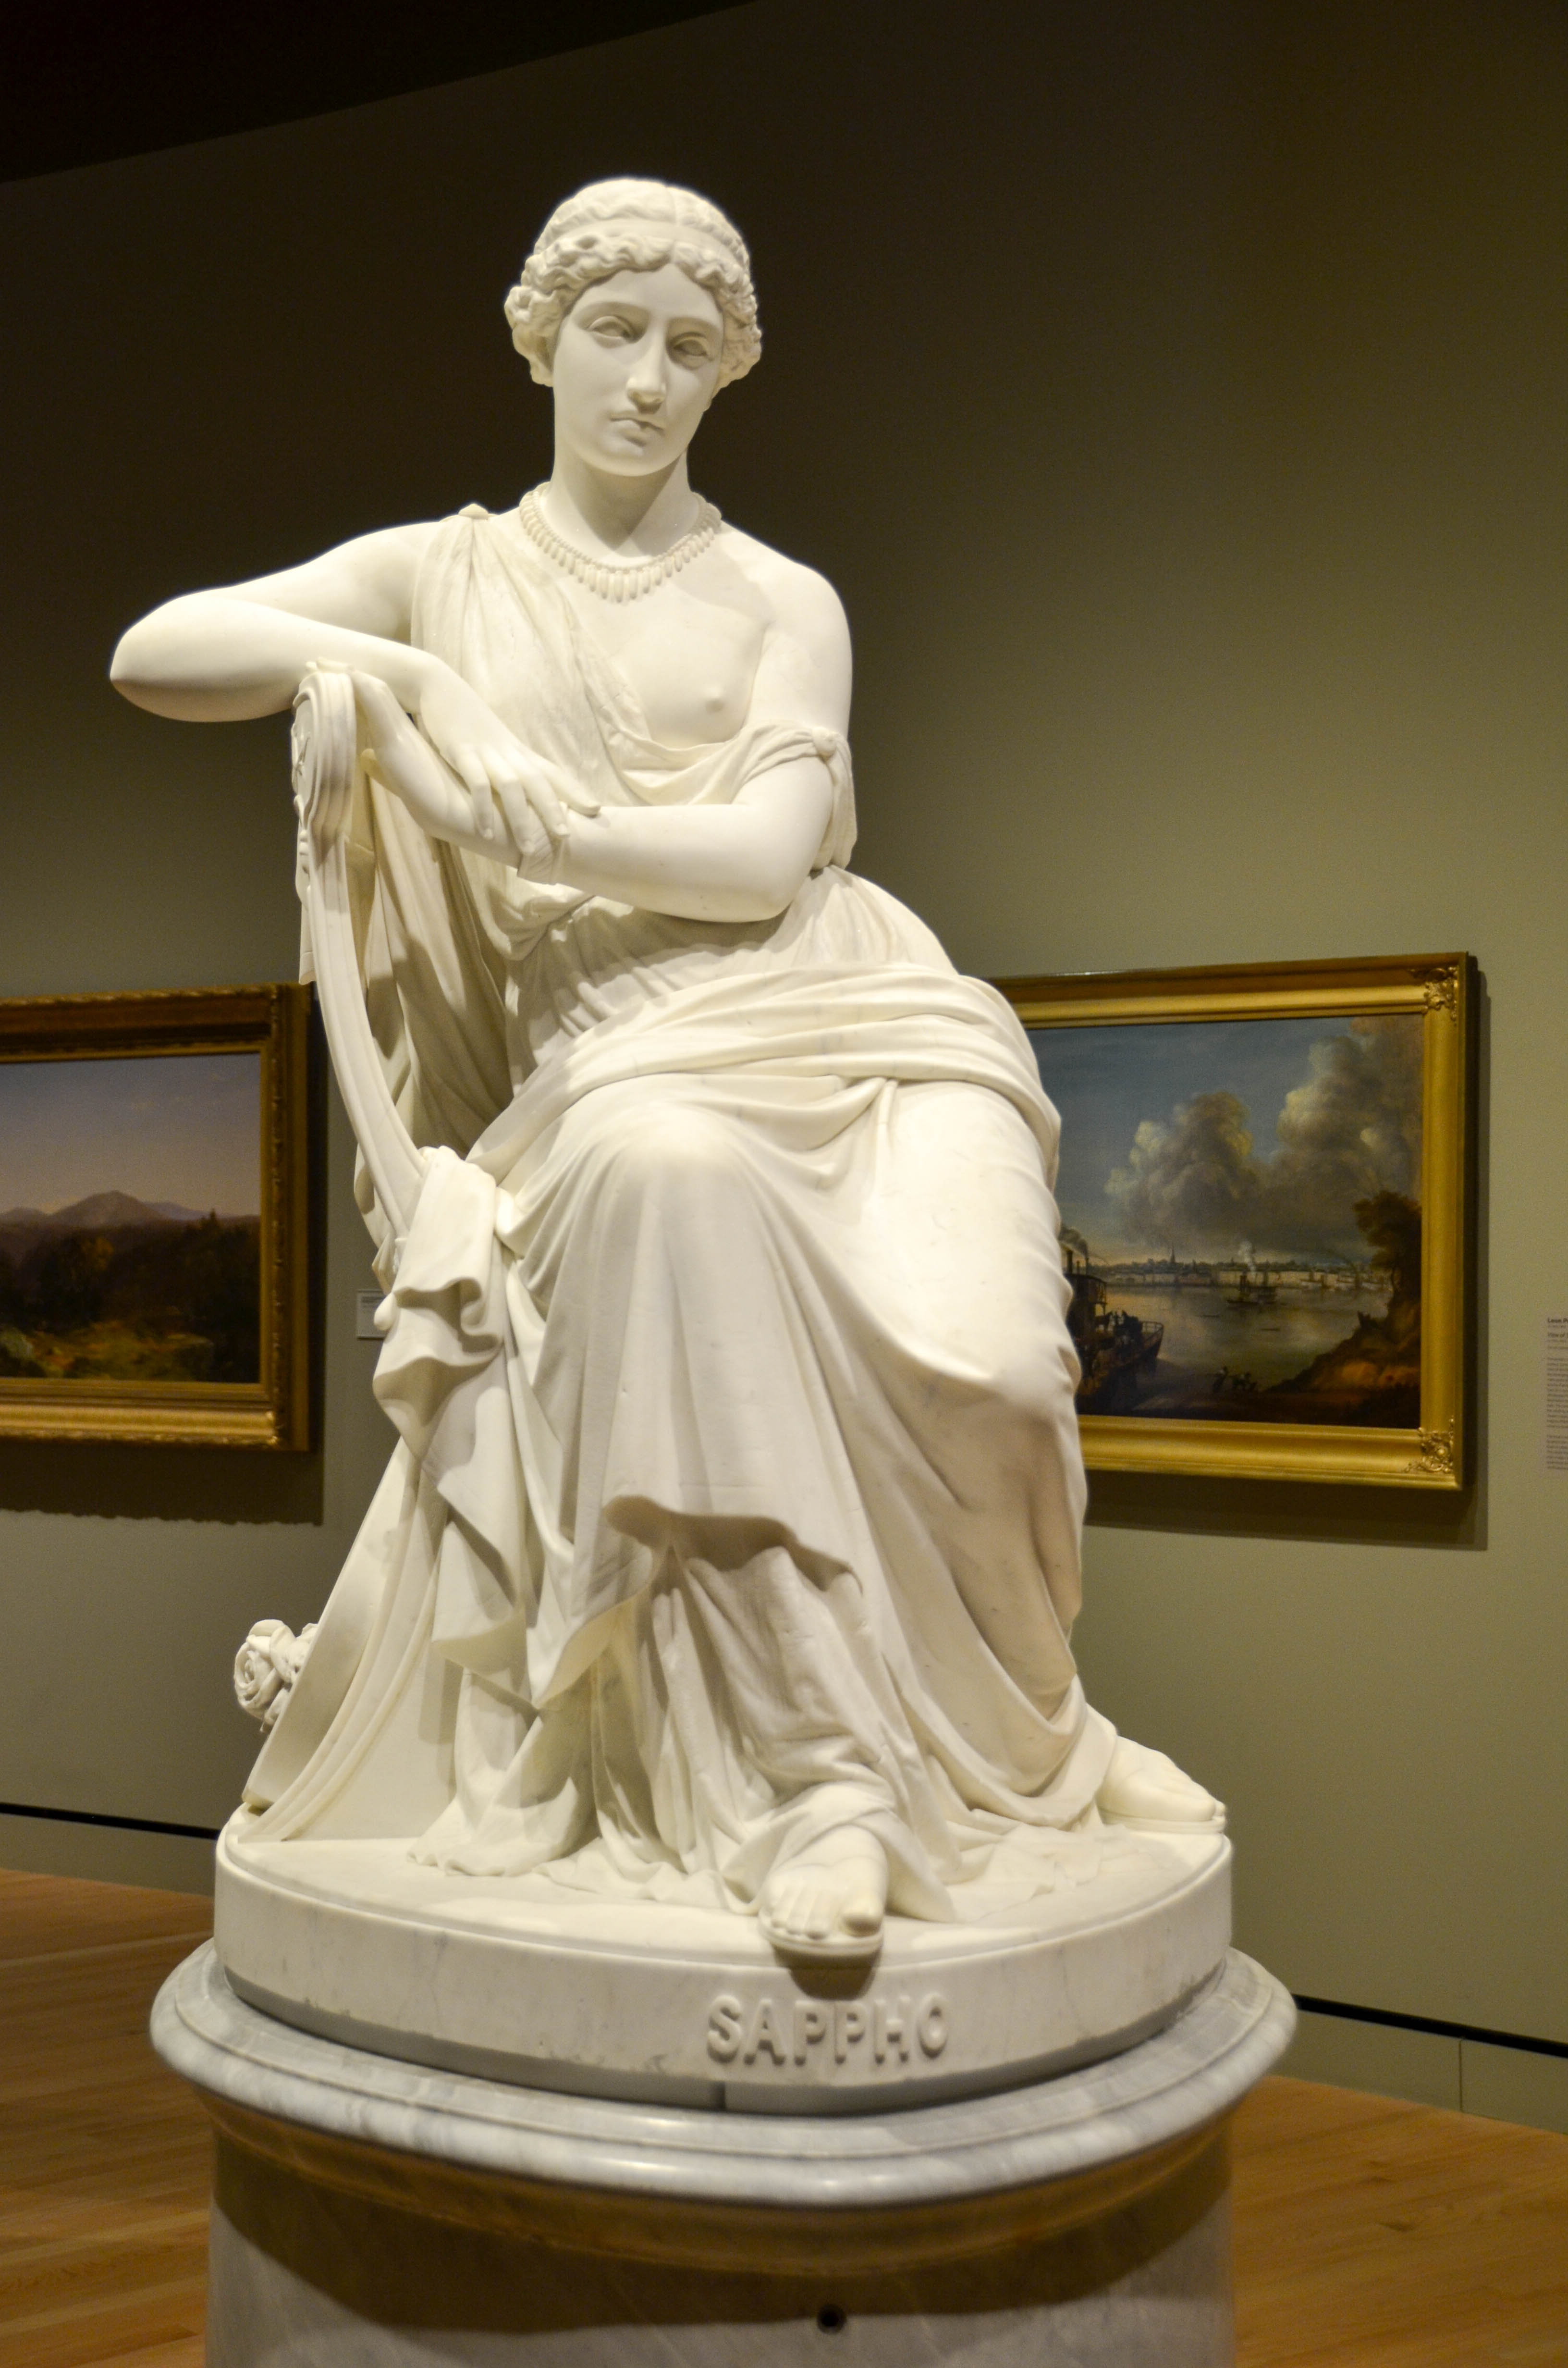 I was surprised to see a sculpture of Sappho.